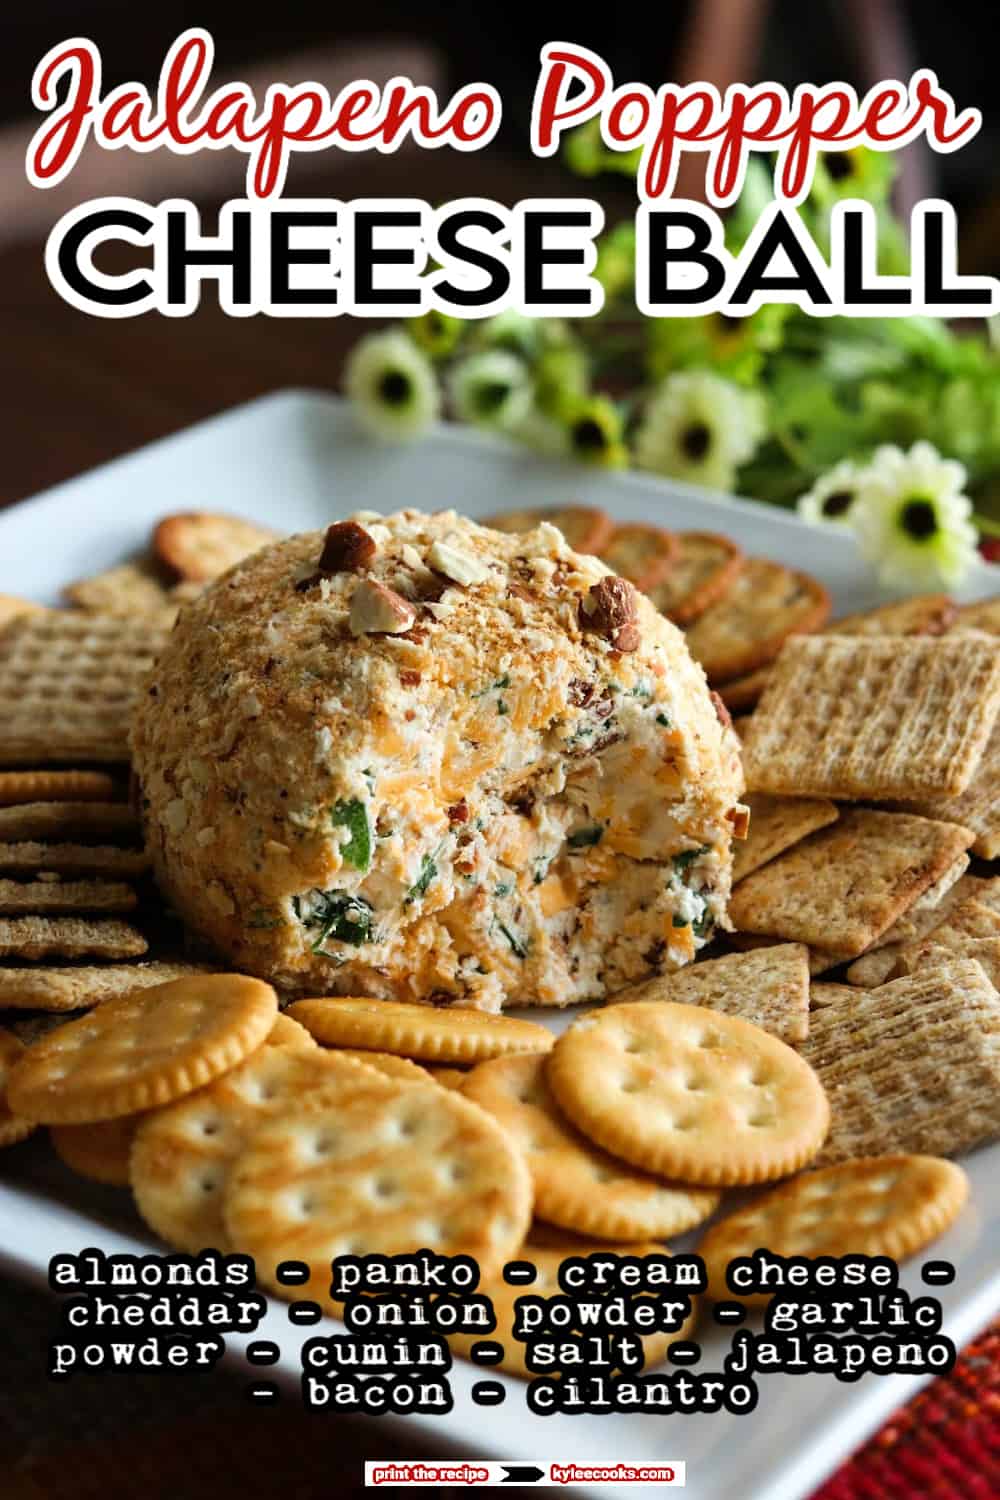 a cheeseball on a plate with recipe ingredients overlaid on top in text.